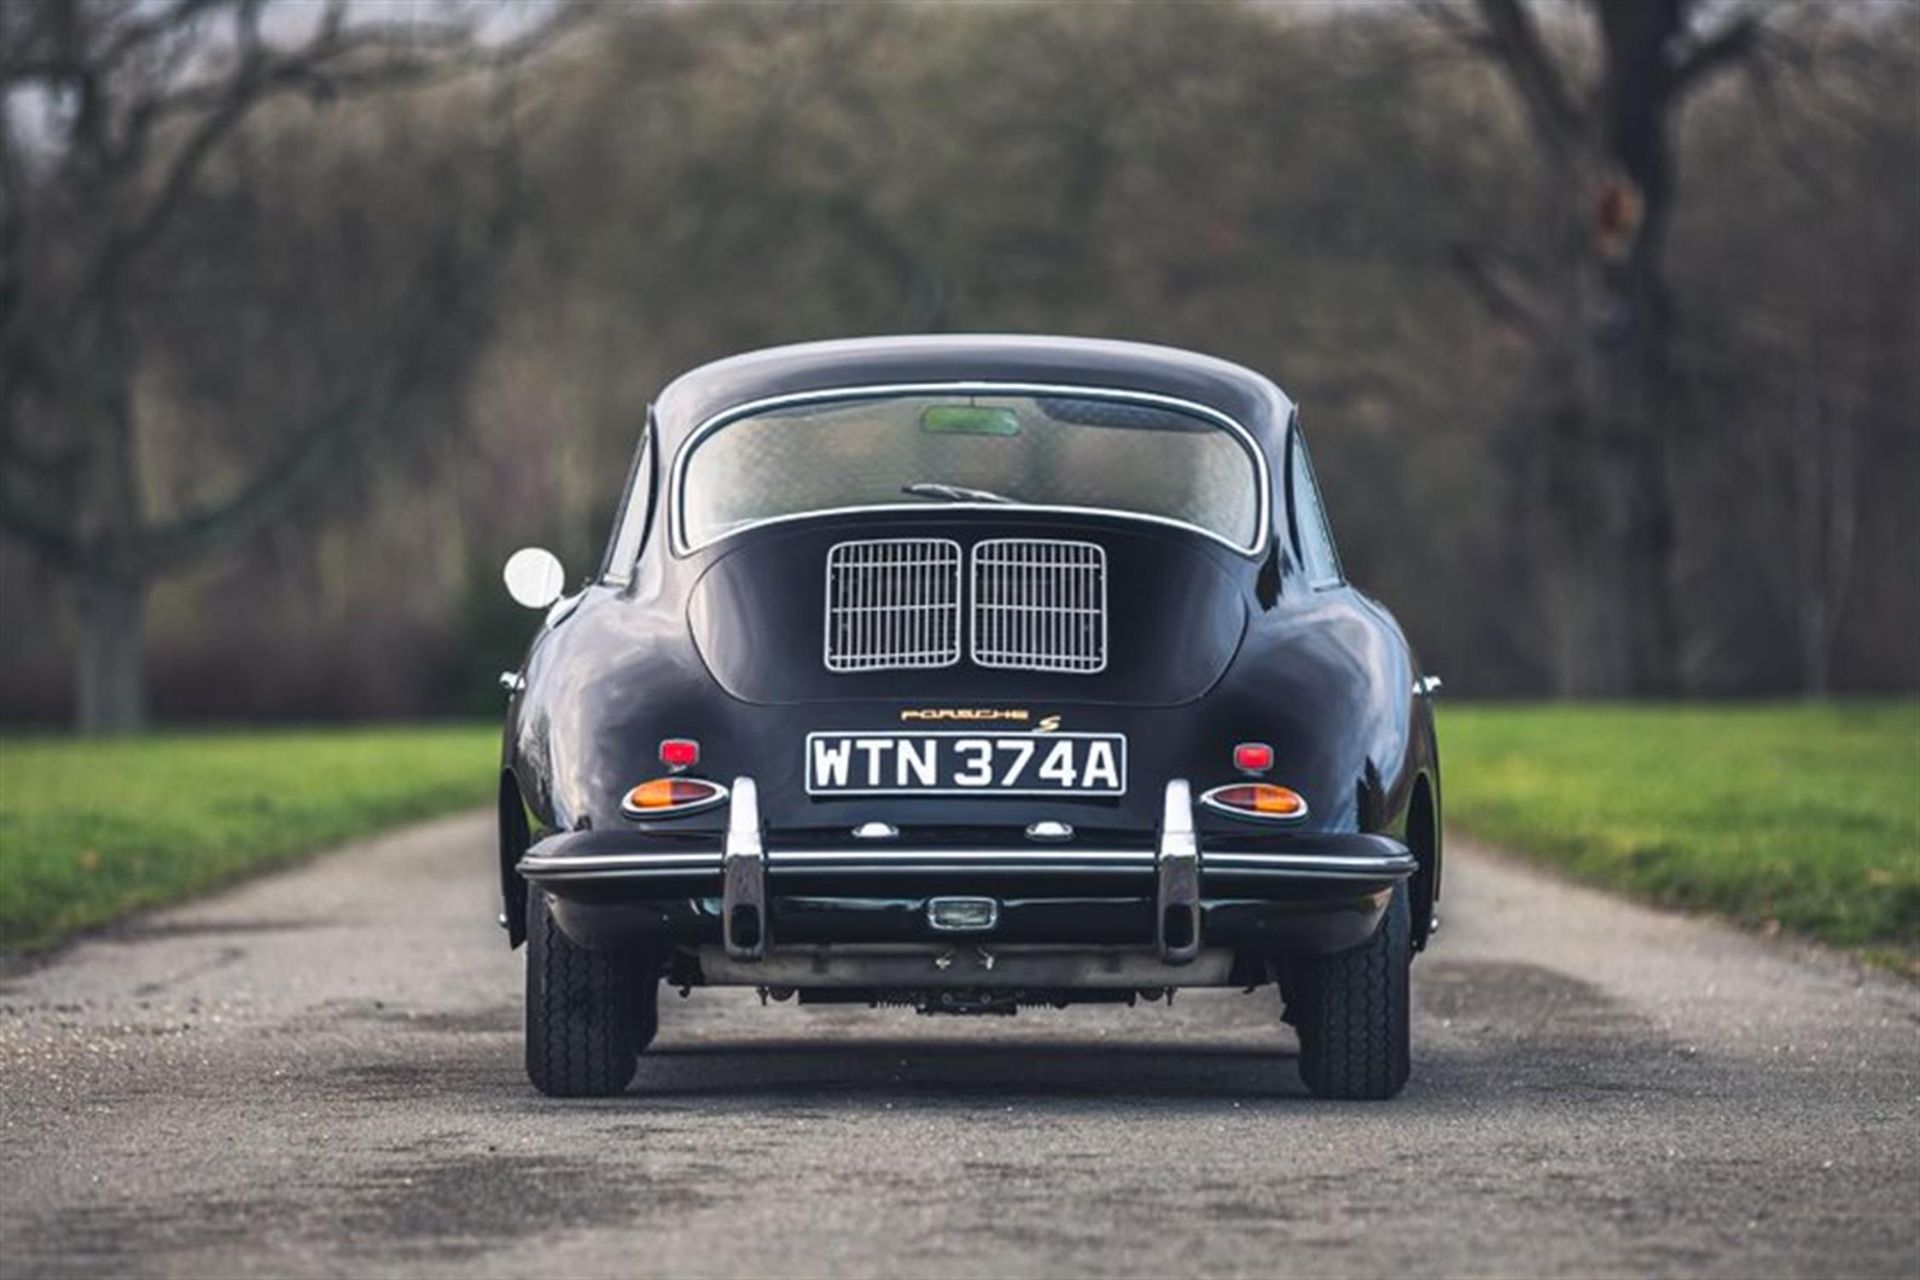 1963 Porsche 356 B T6 Coupe to ‘S’ Specification - Image 2 of 10